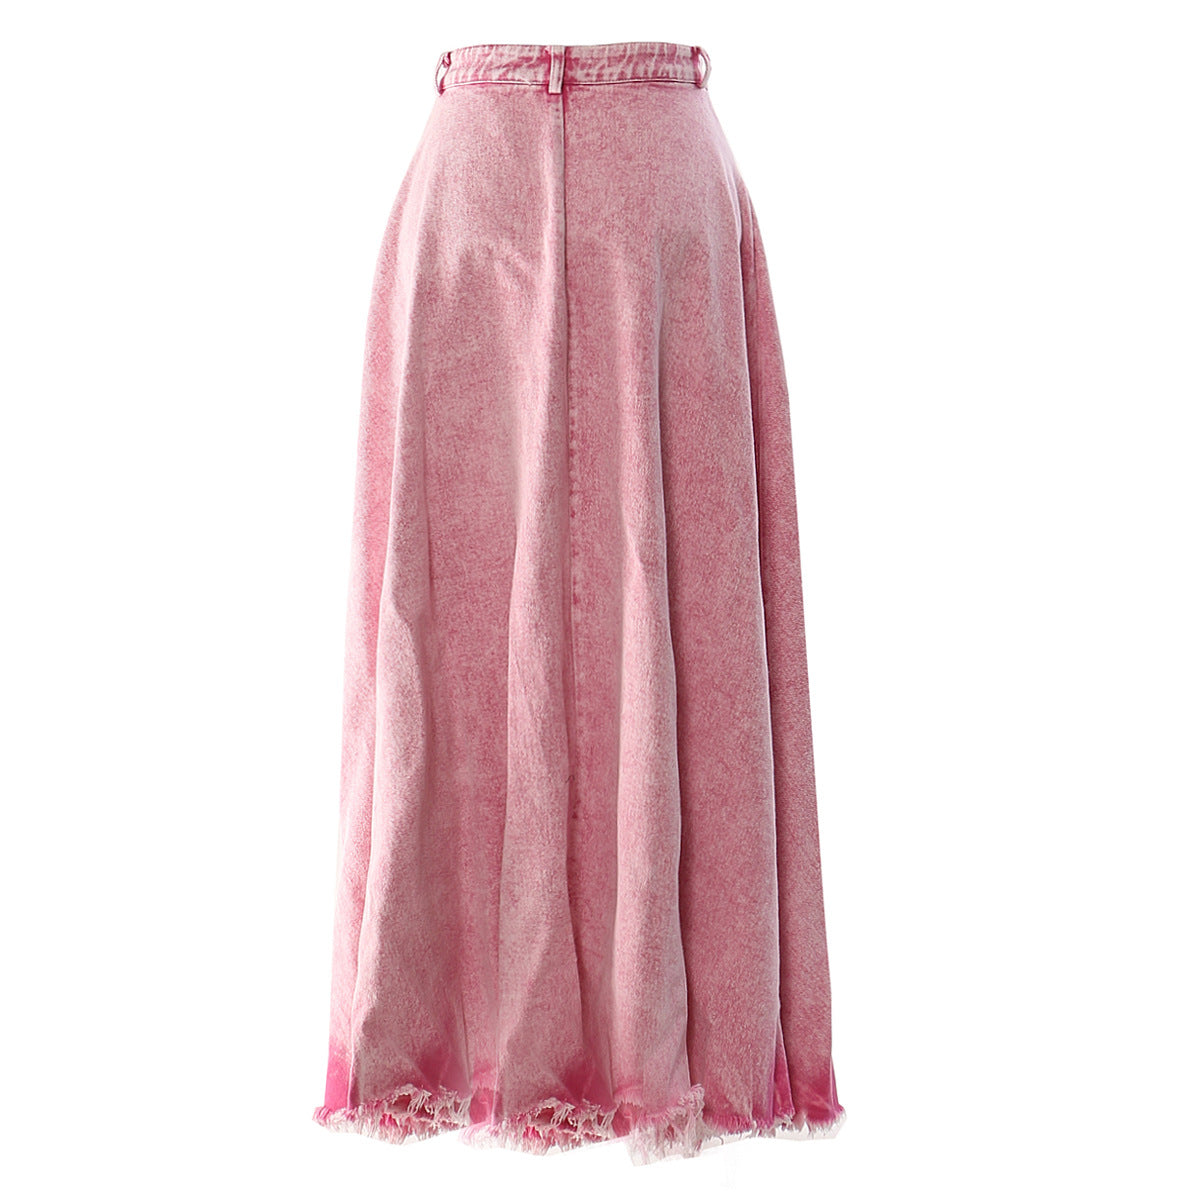 Heavy Industry Washed Denim Long Skirt